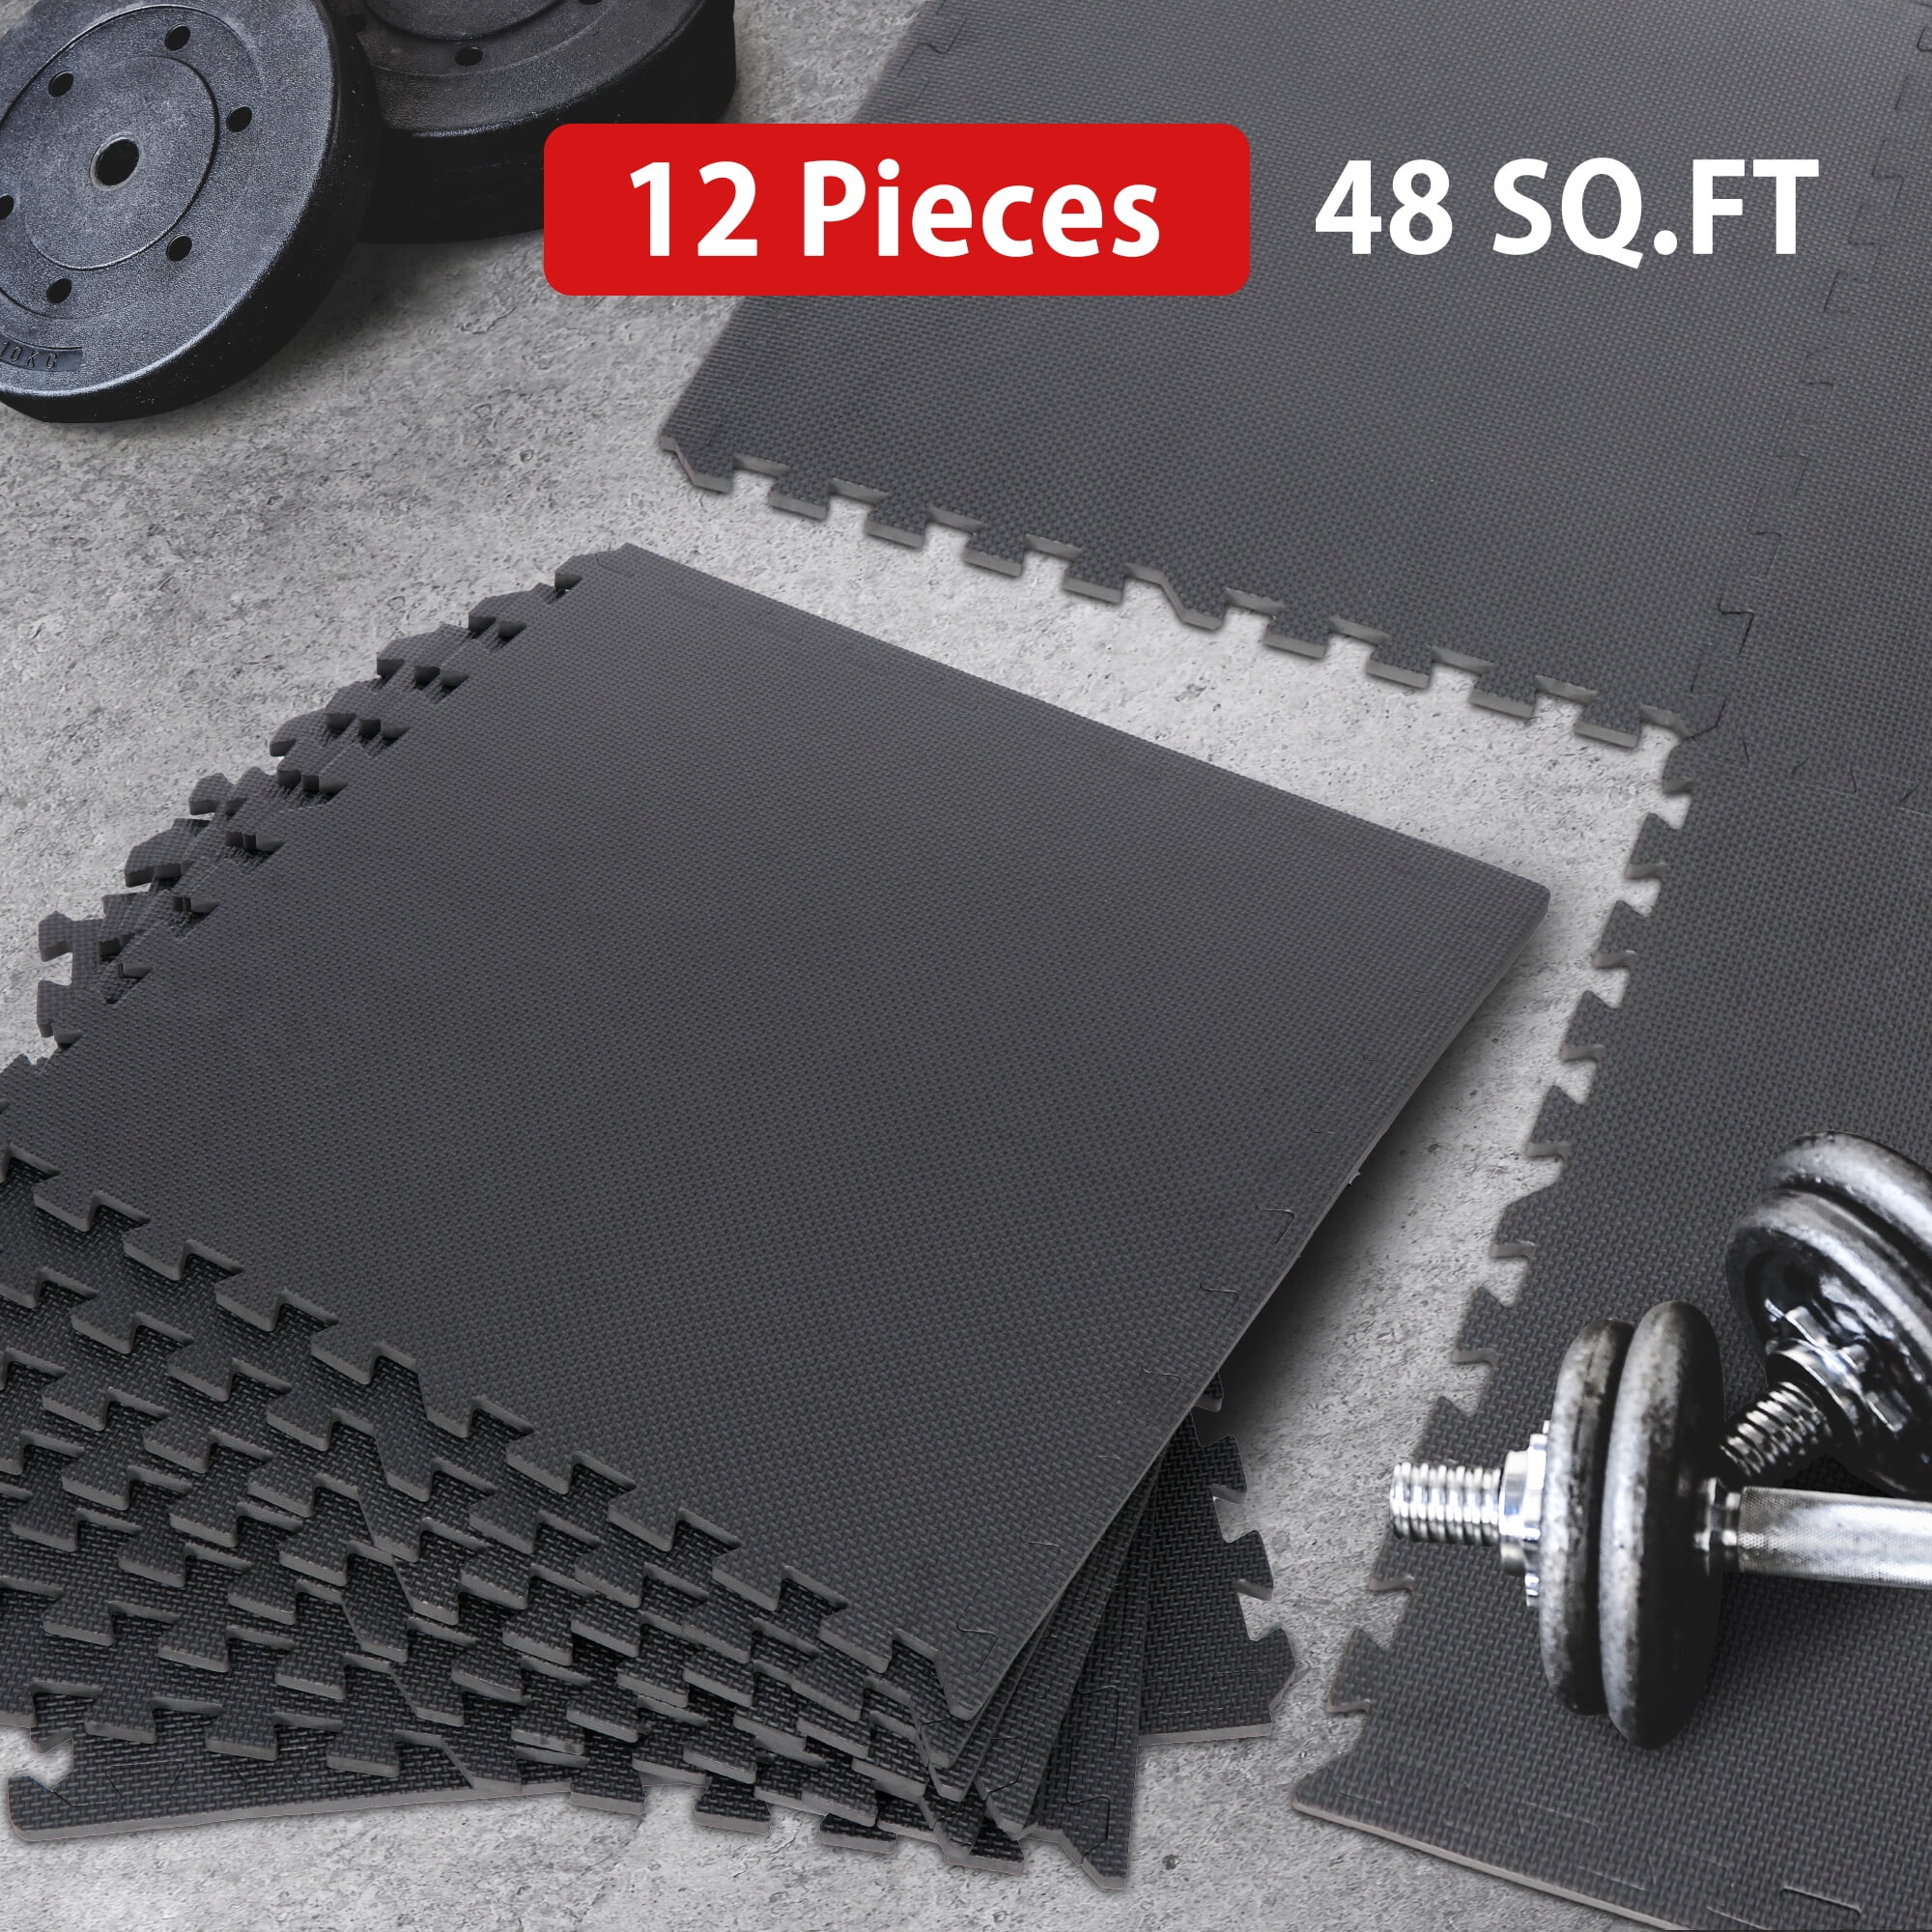 Rubber Interlocking Floor Tiles for Pro or Home Gyms. Easy To Install